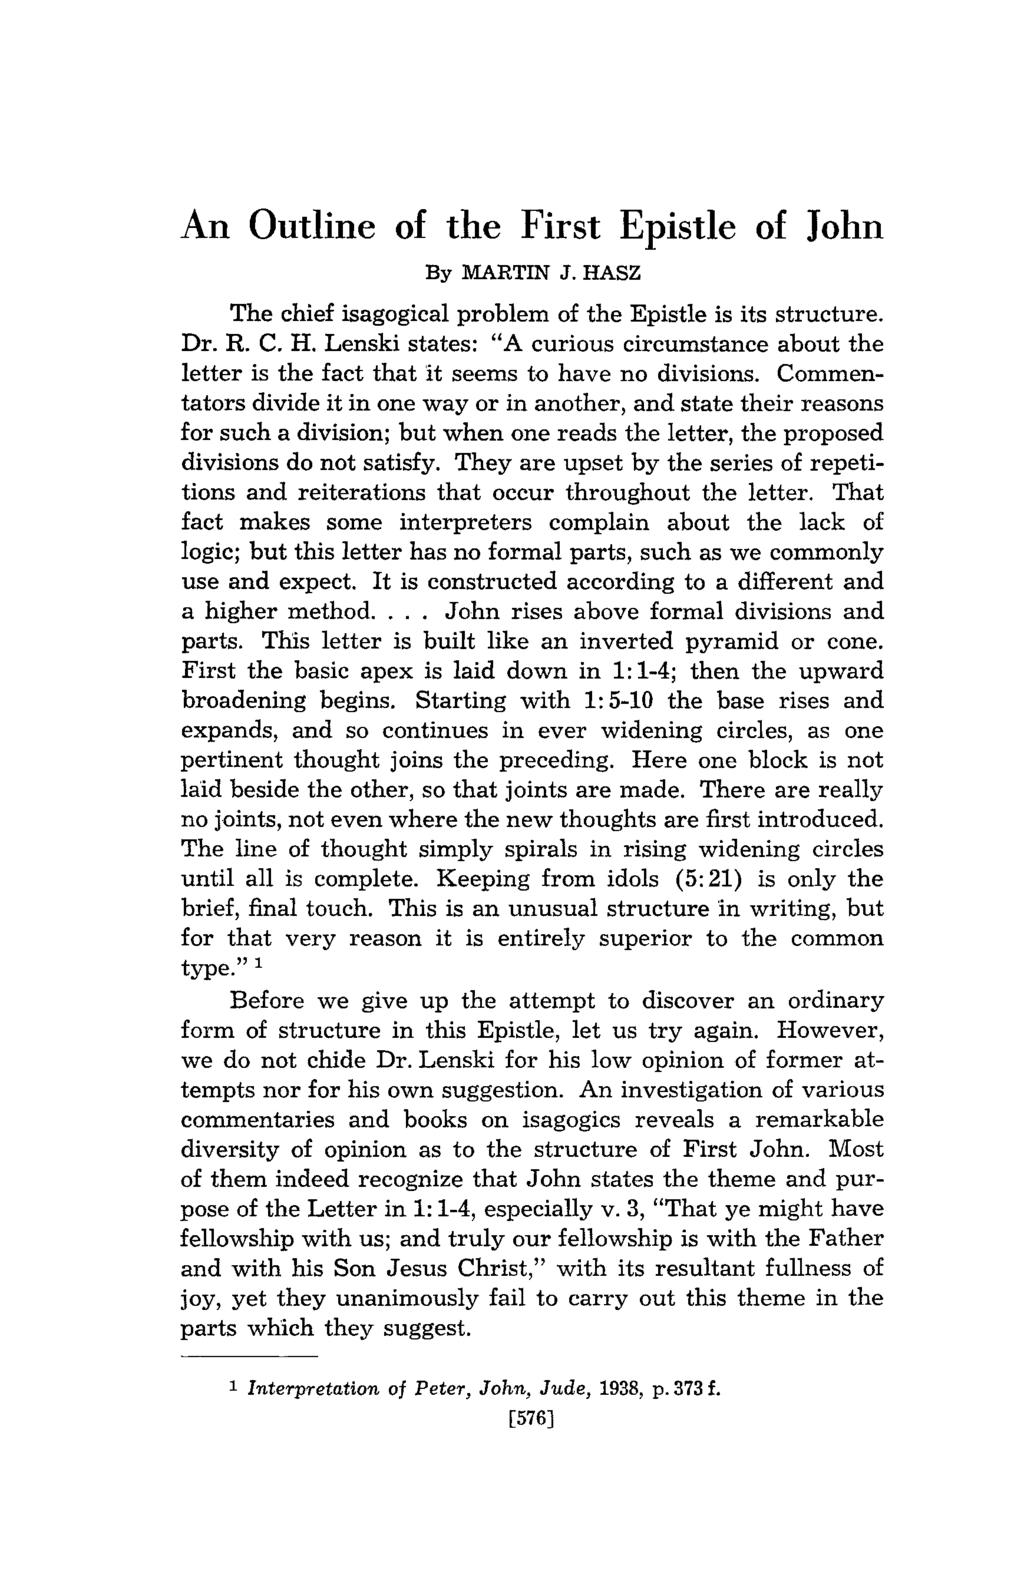 An Outline of the First Epistle of John By MARTIN J. HASZ The chief isagogical problem of the Epistle is its structure. Dr. R. C. H. Lenski states: "A curious circumstance about the letter is the fact that it seems to have no divisions.